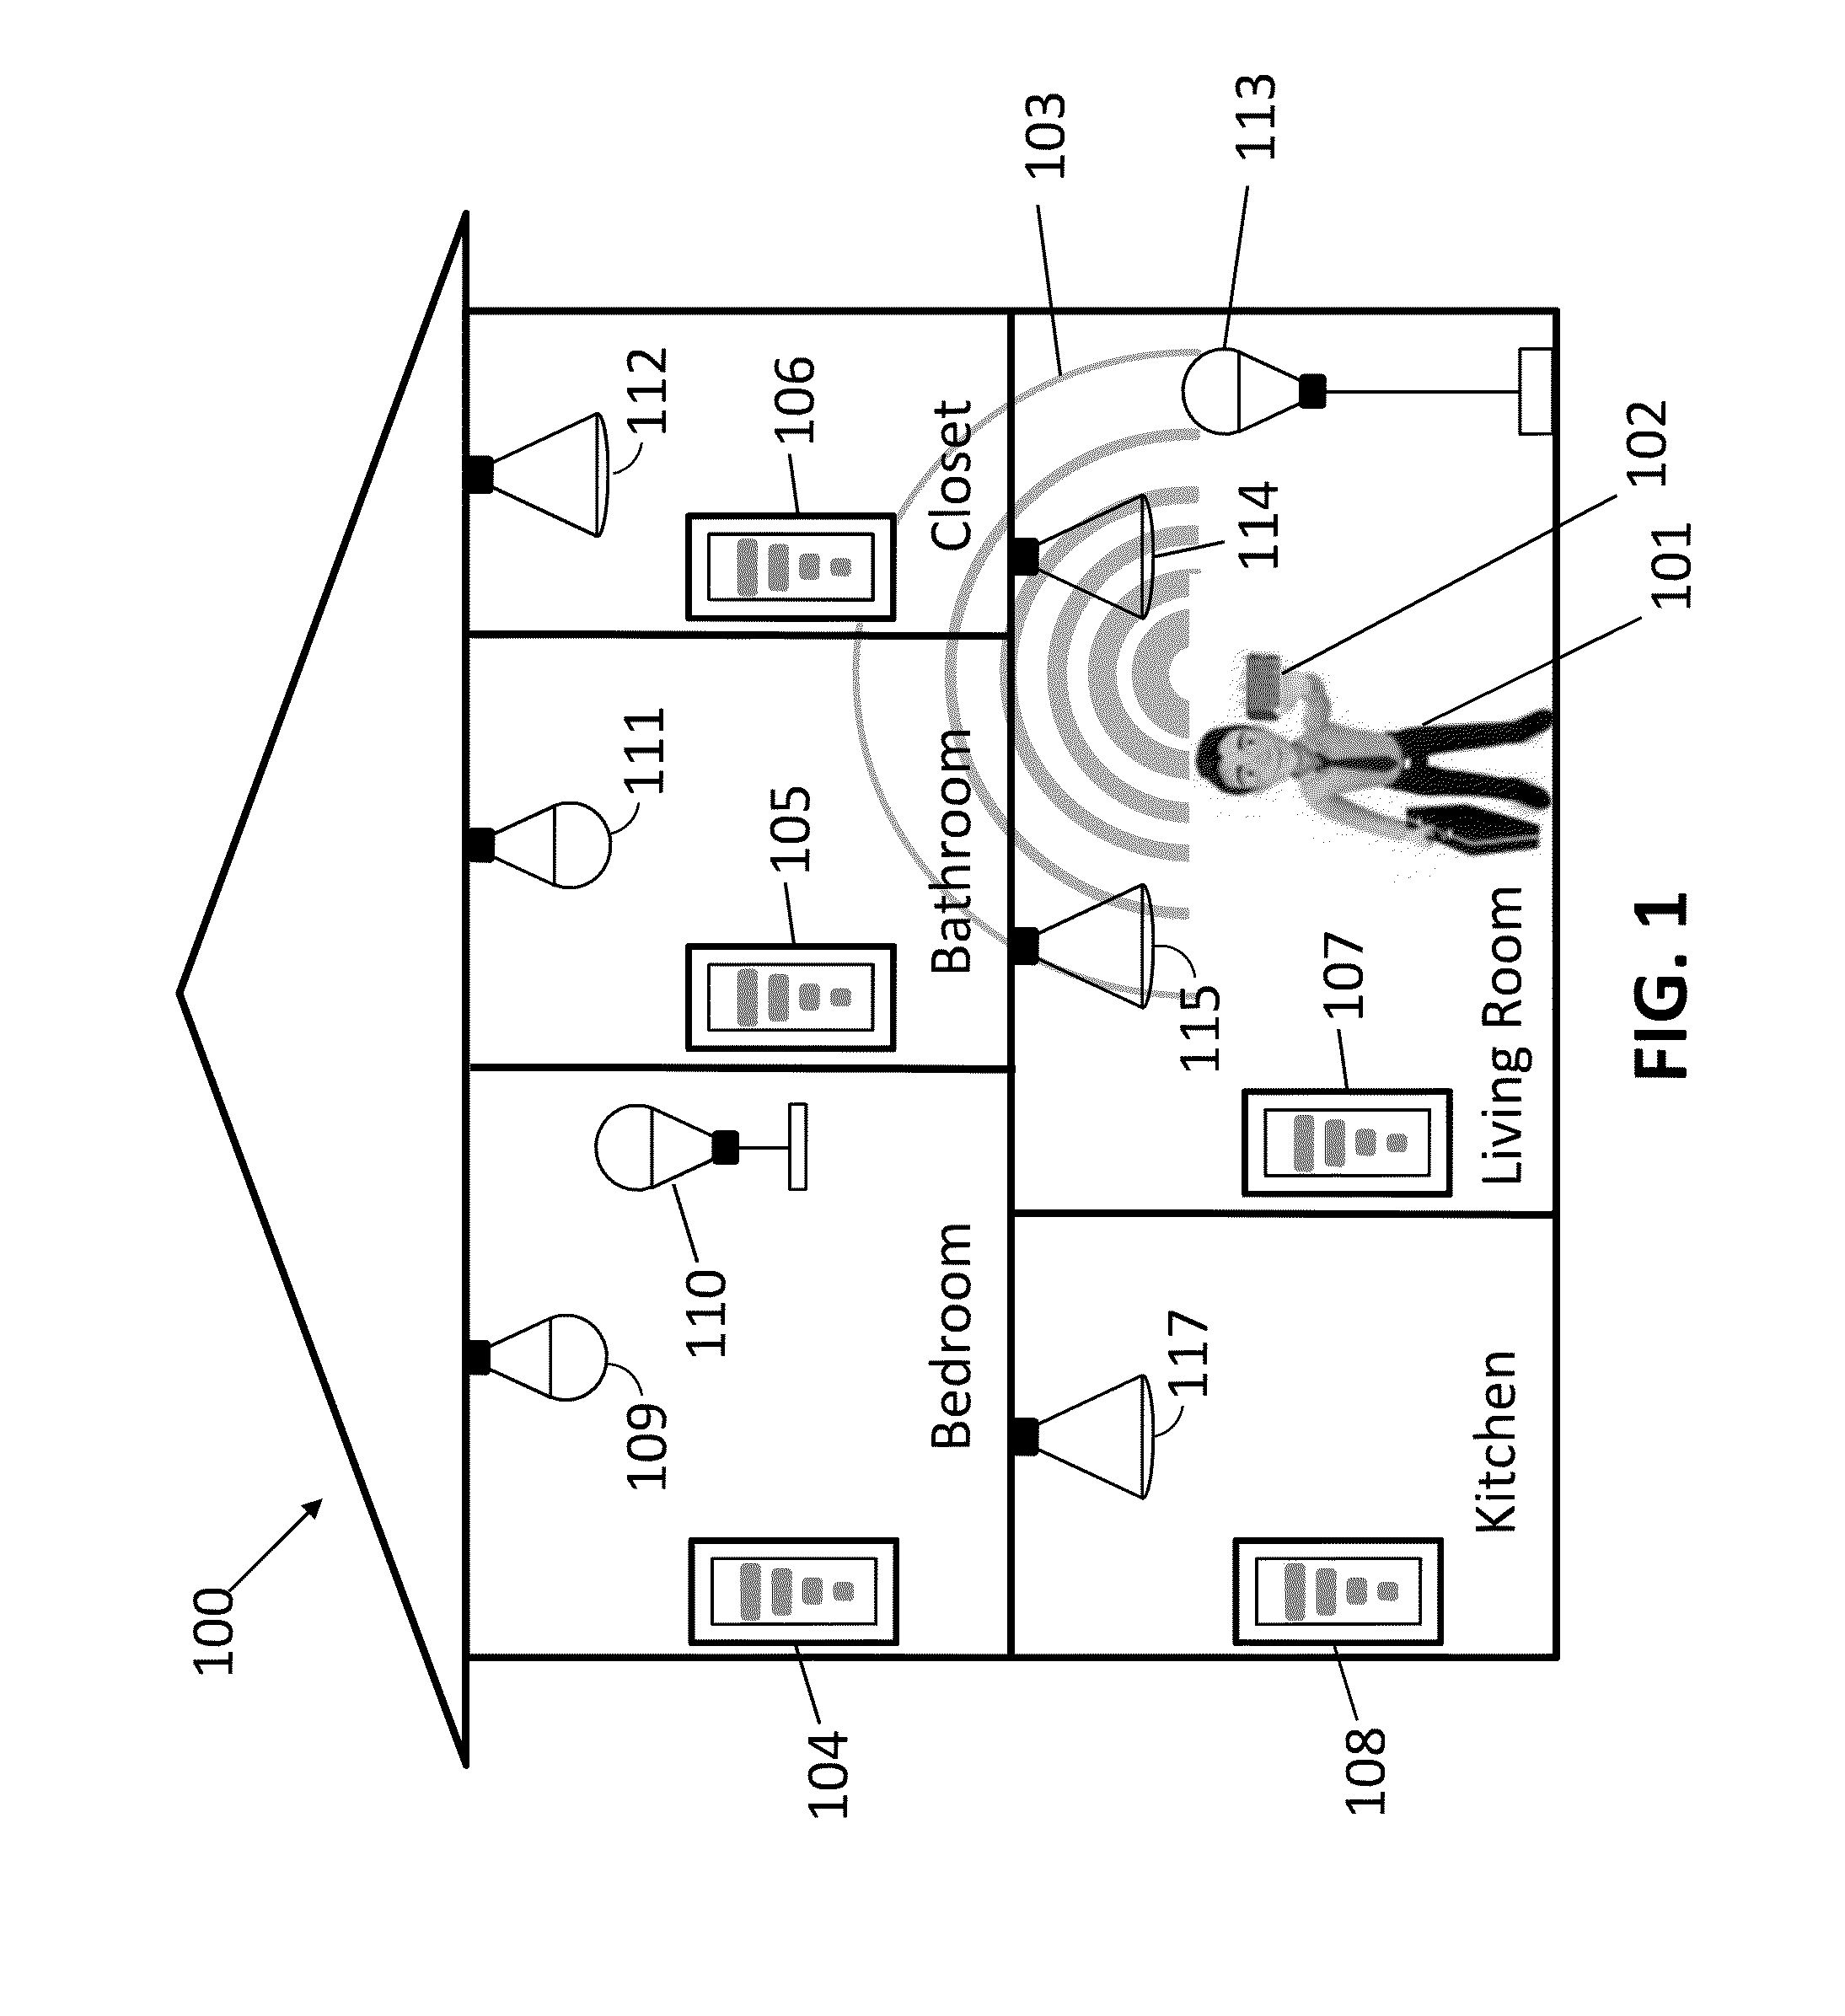 Adaptive home and commercial automation devices, methods and systems based on the proximity of controlling elements